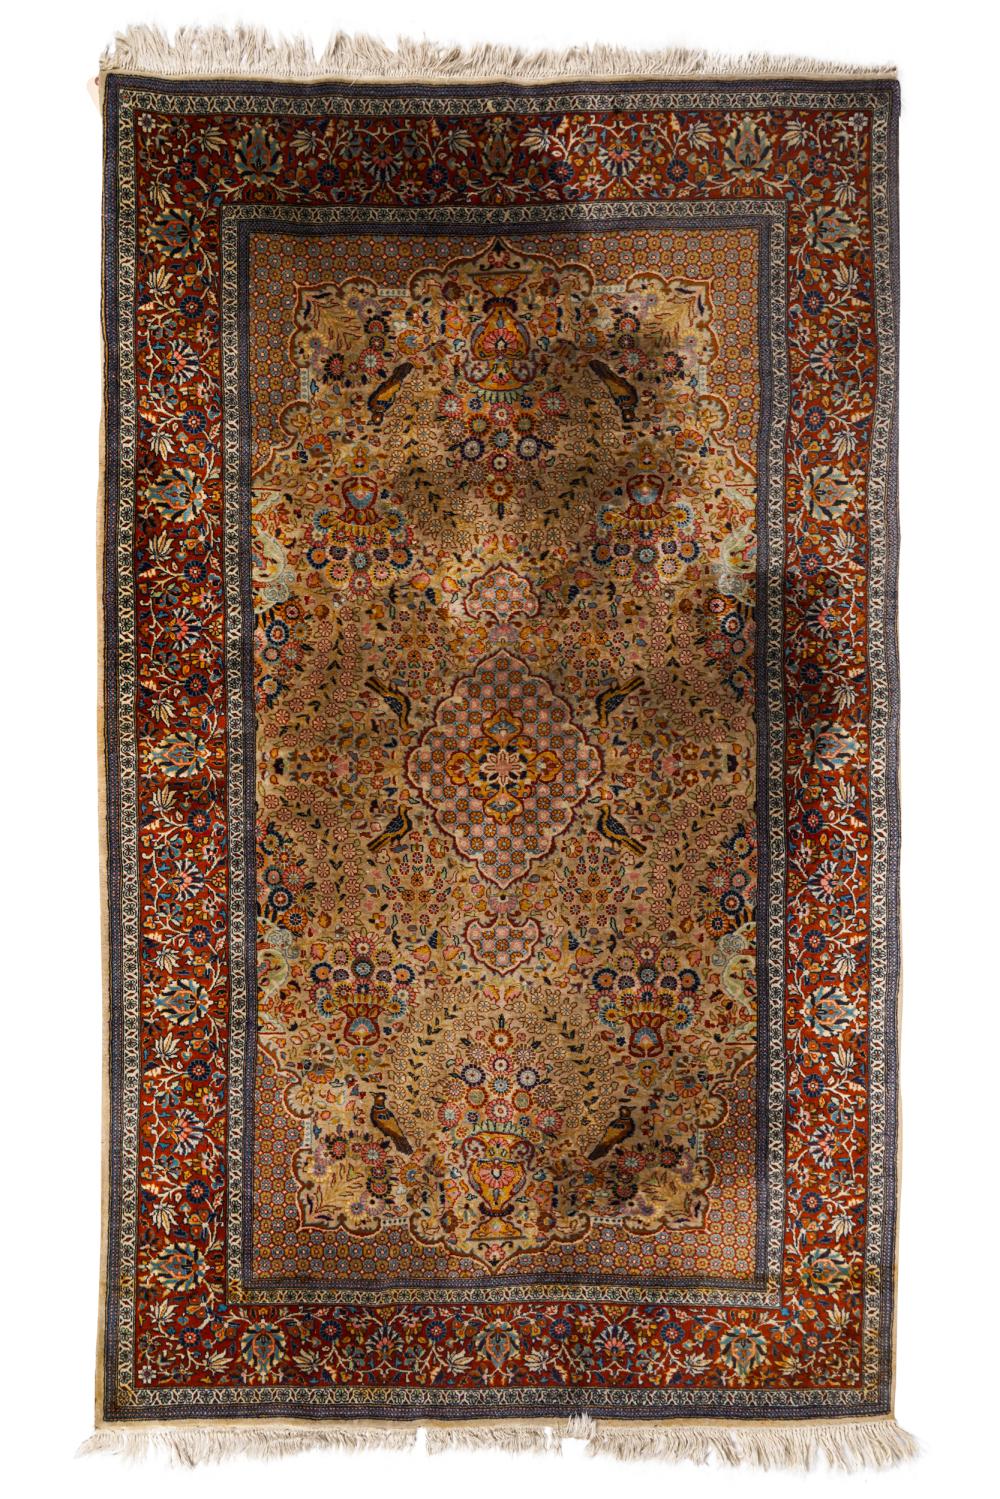 INDO PERSIAN THROW RUGdepicting 337661